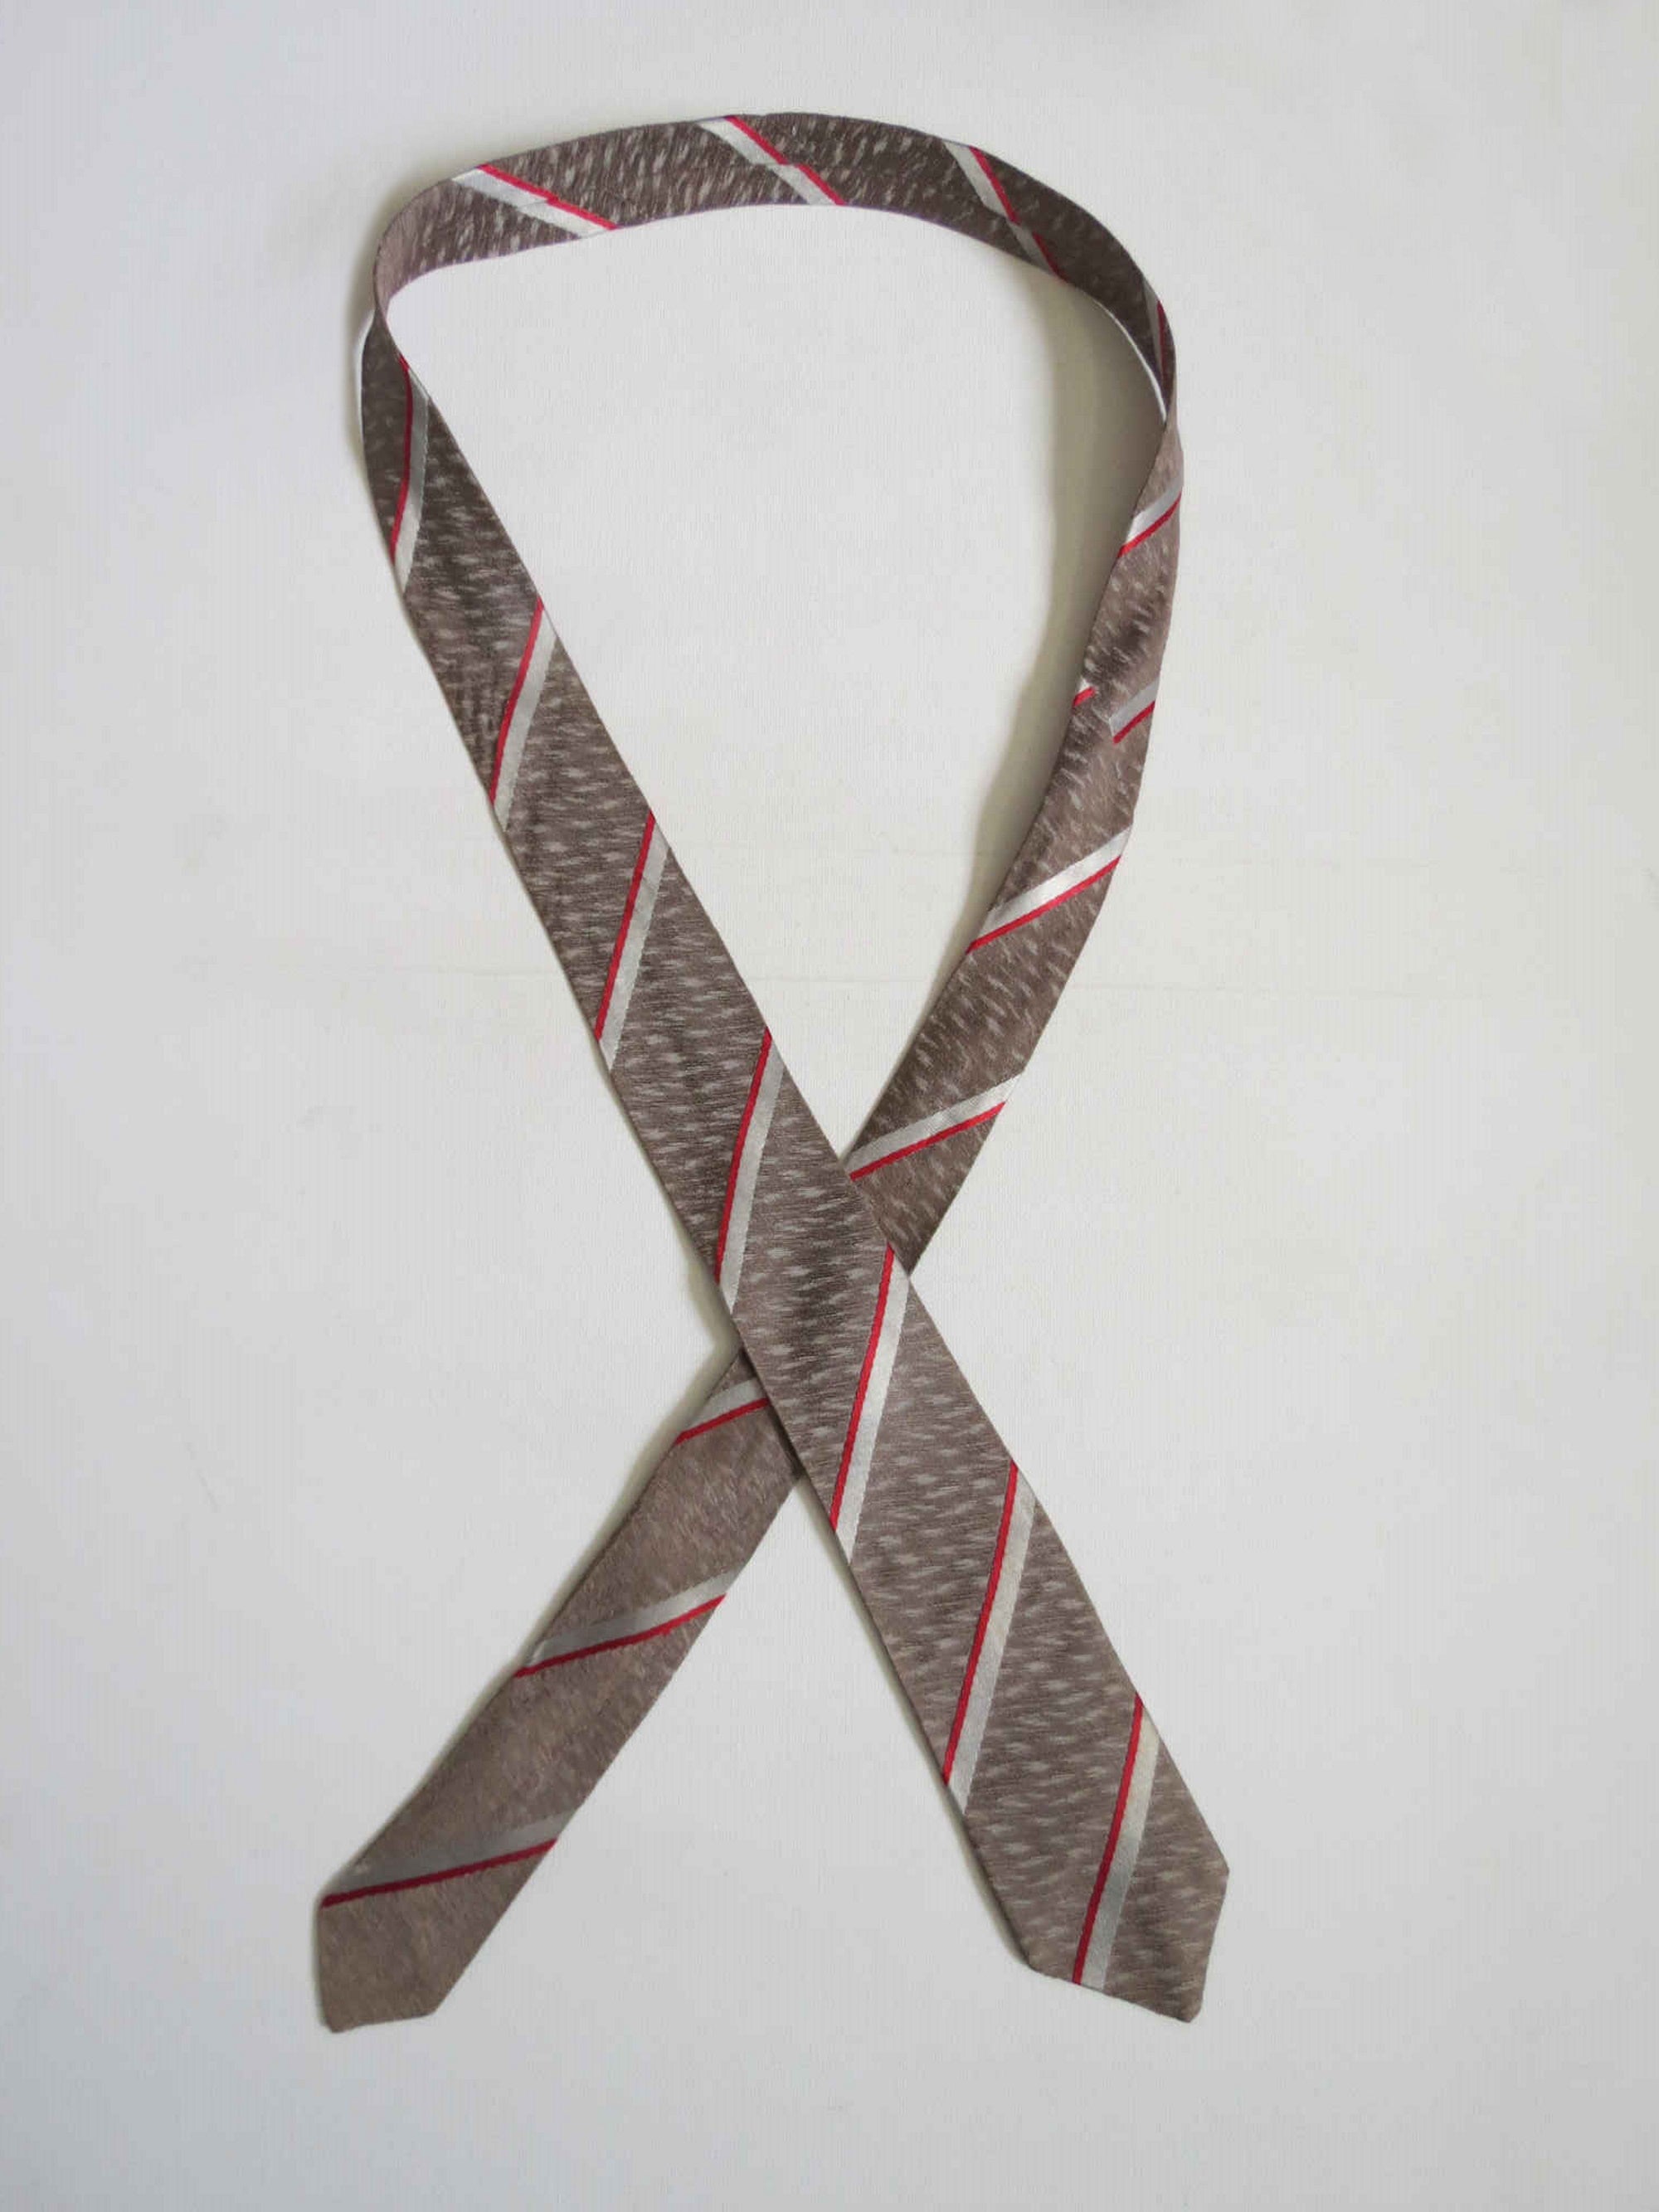 1950s vintage pewter rayon tie with silver and red stripes